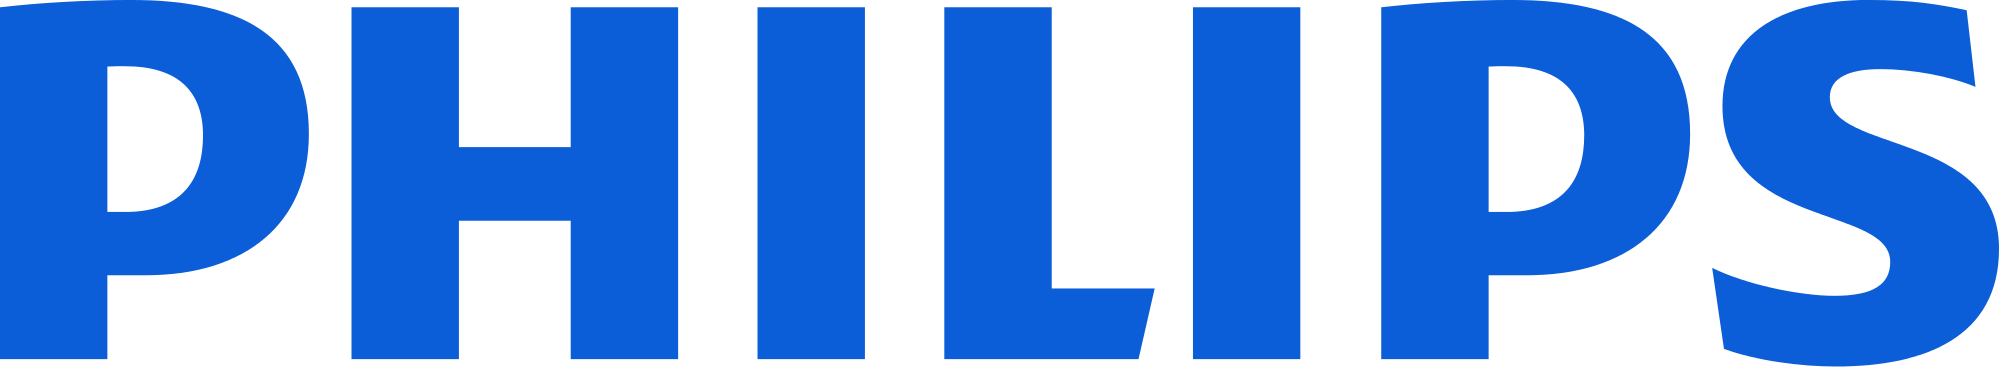 Philips_logo_new.svg.png